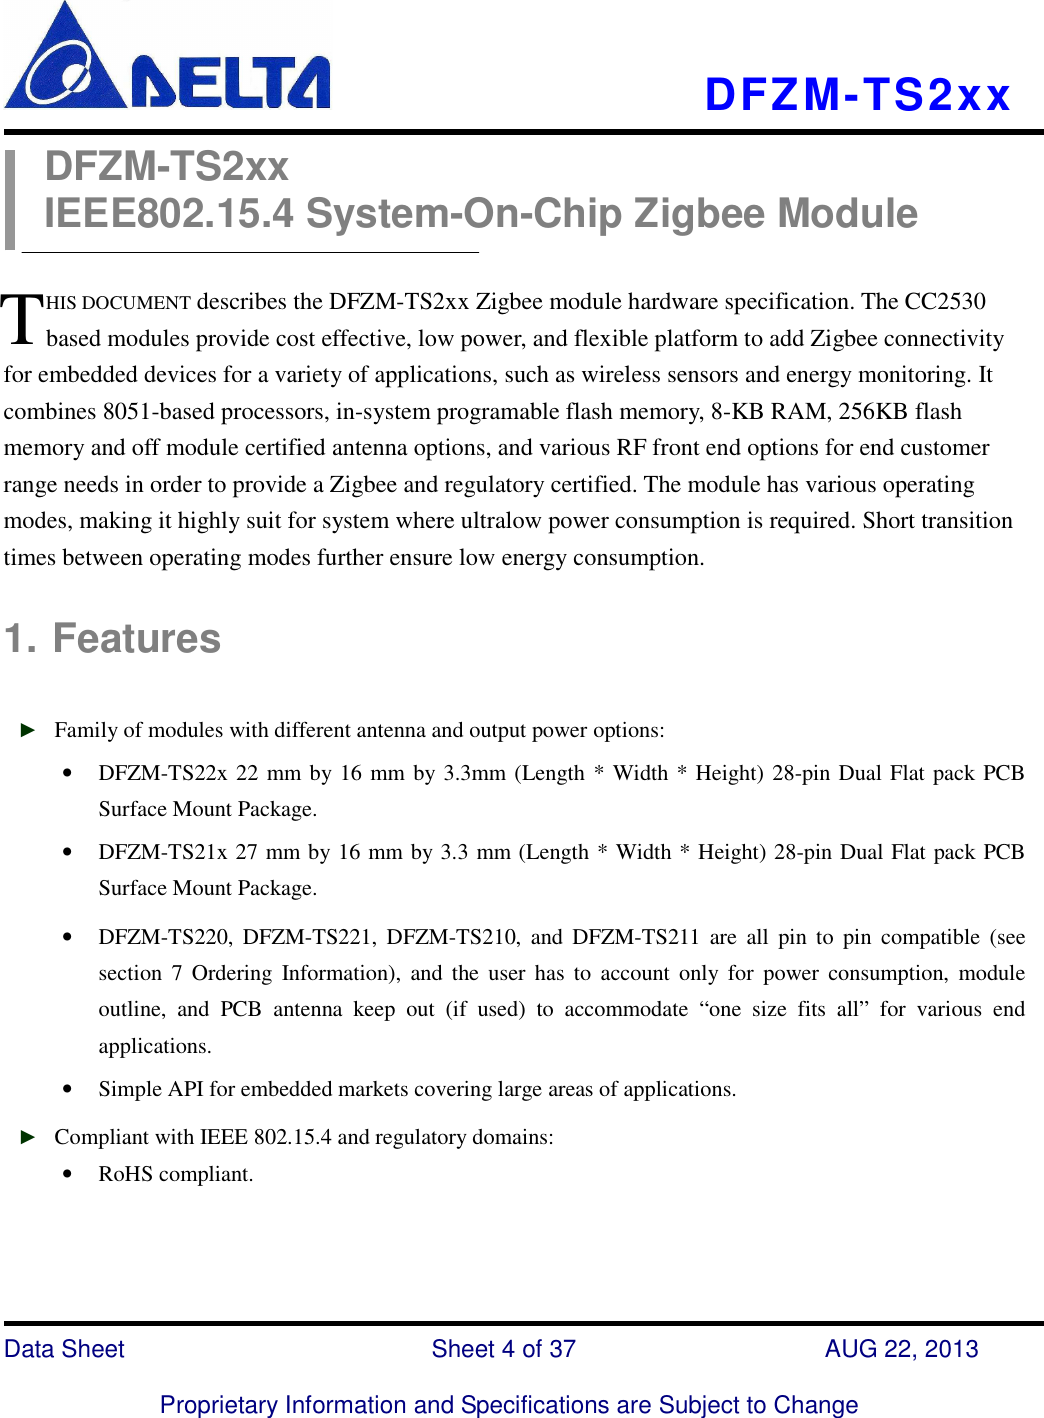    DFZM-TS2xx   Data Sheet                              Sheet 4 of 37                    AUG 22, 2013  Proprietary Information and Specifications are Subject to Change DFZM-TS2xx IEEE802.15.4 System-On-Chip Zigbee Module  HIS DOCUMENT describes the DFZM-TS2xx Zigbee module hardware specification. The CC2530 based modules provide cost effective, low power, and flexible platform to add Zigbee connectivity for embedded devices for a variety of applications, such as wireless sensors and energy monitoring. It combines 8051-based processors, in-system programable flash memory, 8-KB RAM, 256KB flash memory and off module certified antenna options, and various RF front end options for end customer range needs in order to provide a Zigbee and regulatory certified. The module has various operating modes, making it highly suit for system where ultralow power consumption is required. Short transition times between operating modes further ensure low energy consumption.  1. Features  ► Family of modules with different antenna and output power options: • DFZM-TS22x 22 mm by 16 mm by 3.3mm (Length * Width * Height) 28-pin Dual Flat pack PCB Surface Mount Package. • DFZM-TS21x 27 mm by 16 mm by 3.3 mm (Length * Width * Height) 28-pin Dual Flat pack PCB Surface Mount Package. • DFZM-TS220,  DFZM-TS221,  DFZM-TS210,  and  DFZM-TS211  are  all  pin  to  pin  compatible  (see section  7  Ordering  Information),  and  the  user  has  to  account  only  for  power  consumption,  module outline,  and  PCB  antenna  keep  out  (if  used)  to  accommodate  “one  size  fits  all”  for  various  end applications. • Simple API for embedded markets covering large areas of applications. ► Compliant with IEEE 802.15.4 and regulatory domains: • RoHS compliant.   T 